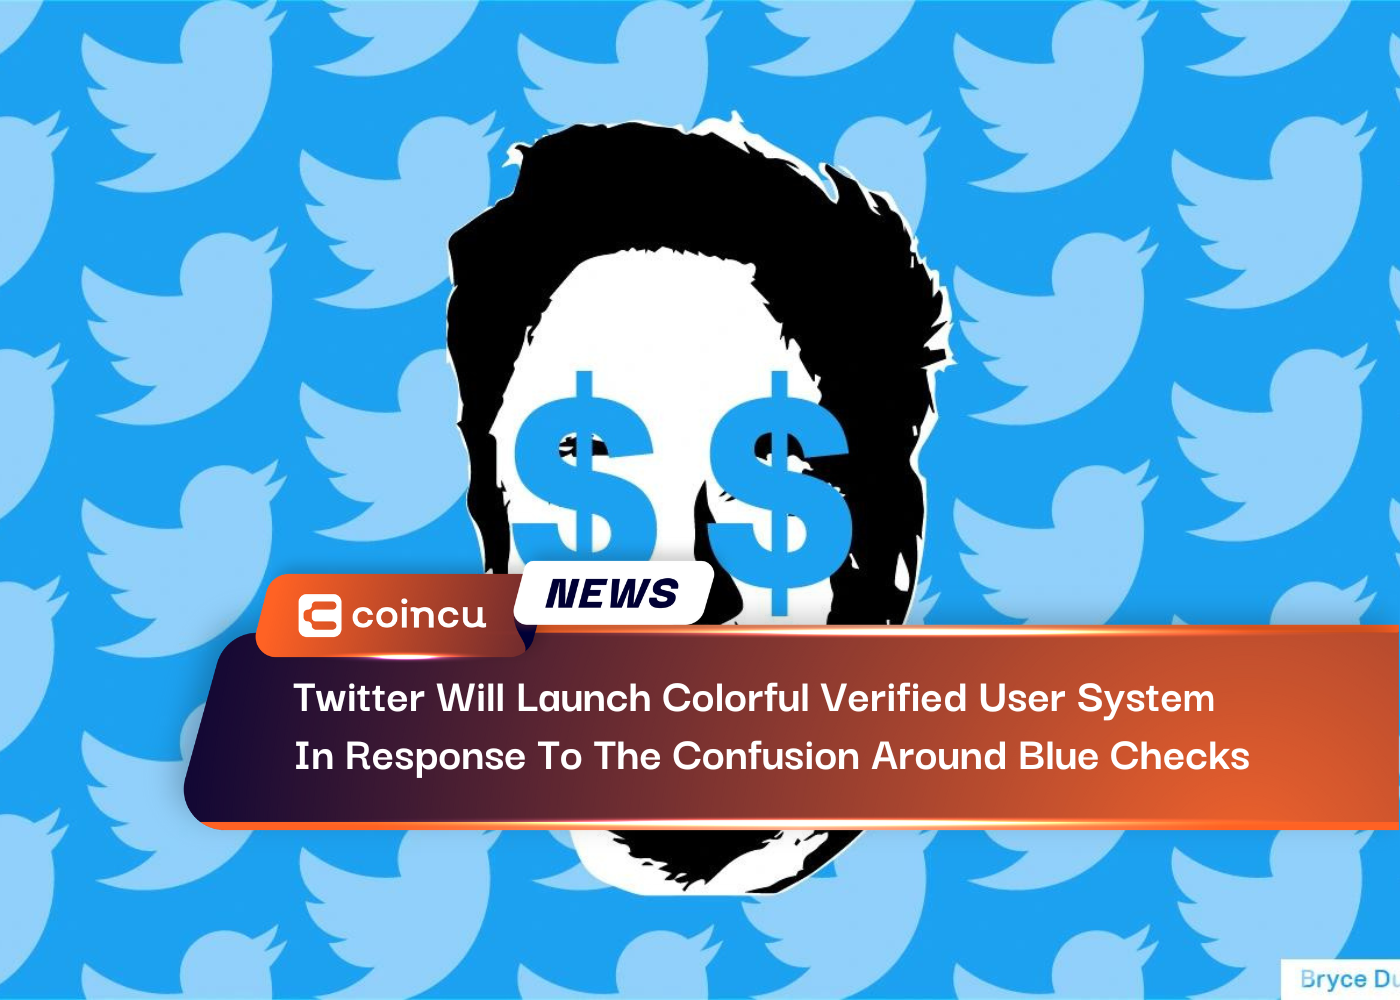 Twitter Will Launch Colorful Verified User System